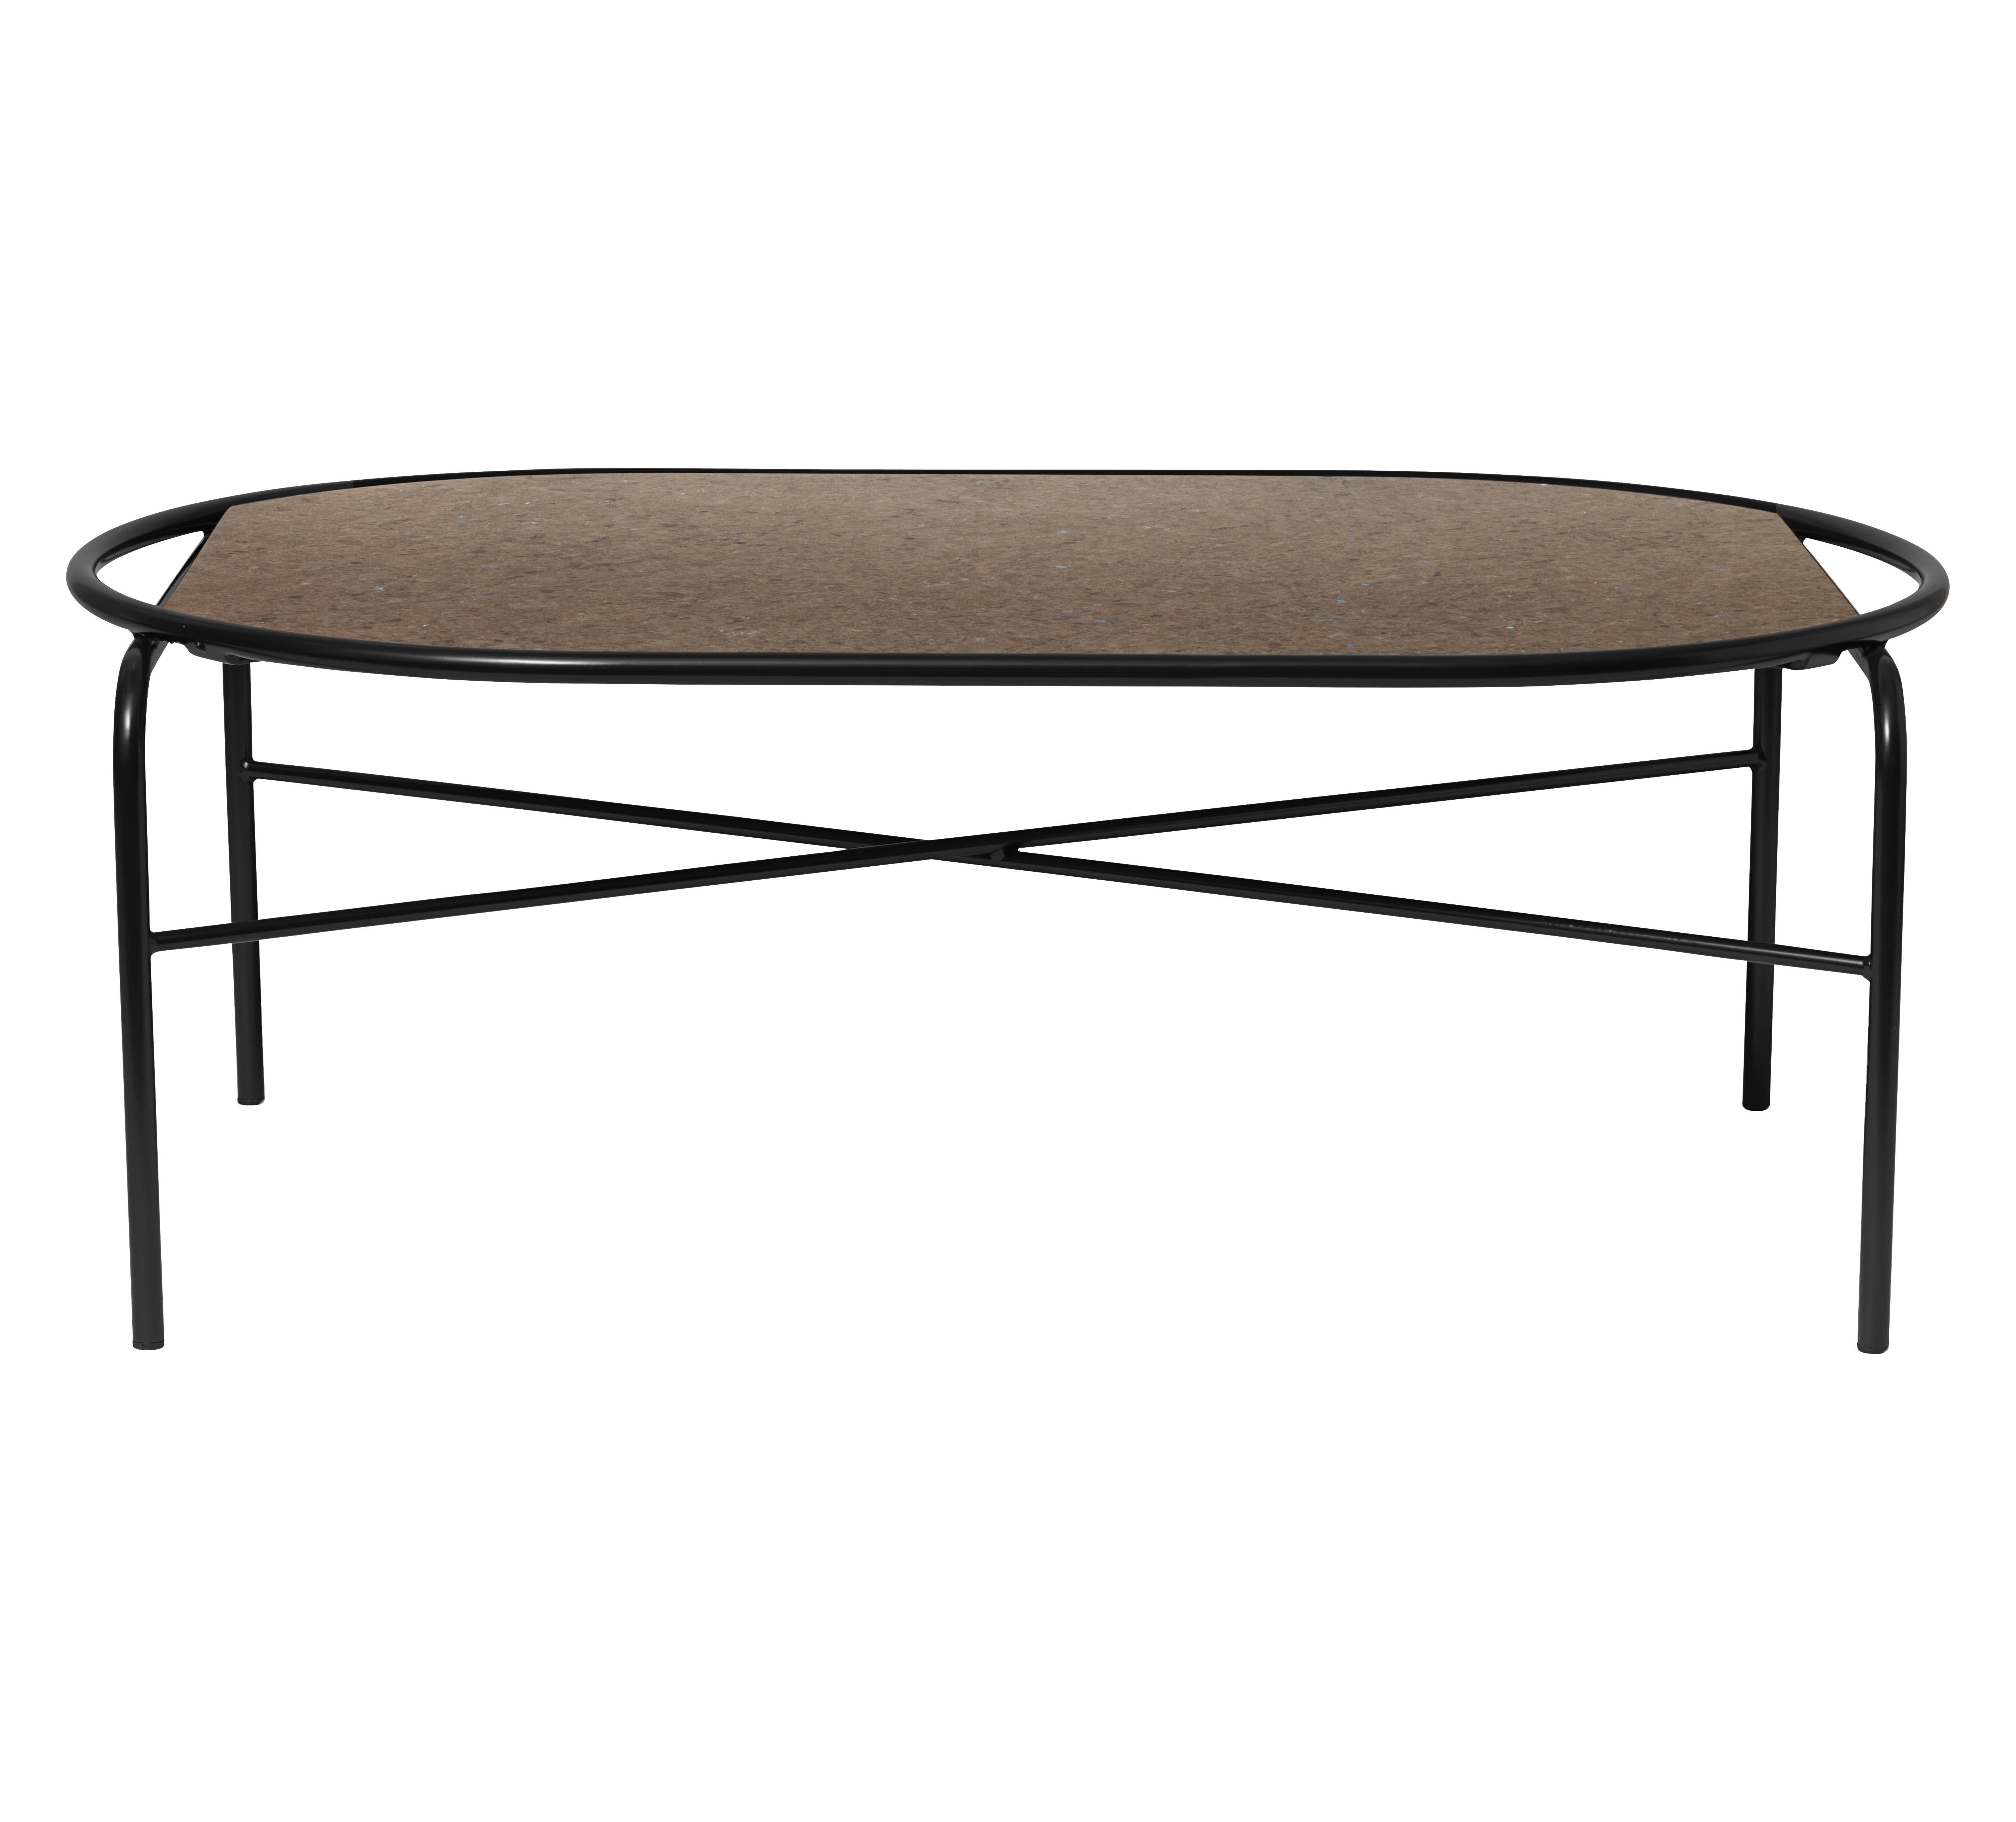 For Sale: Brown (Granite) Secant Oval Table in Steel Frame, by Sara Wright Polmar from Warm Nordic